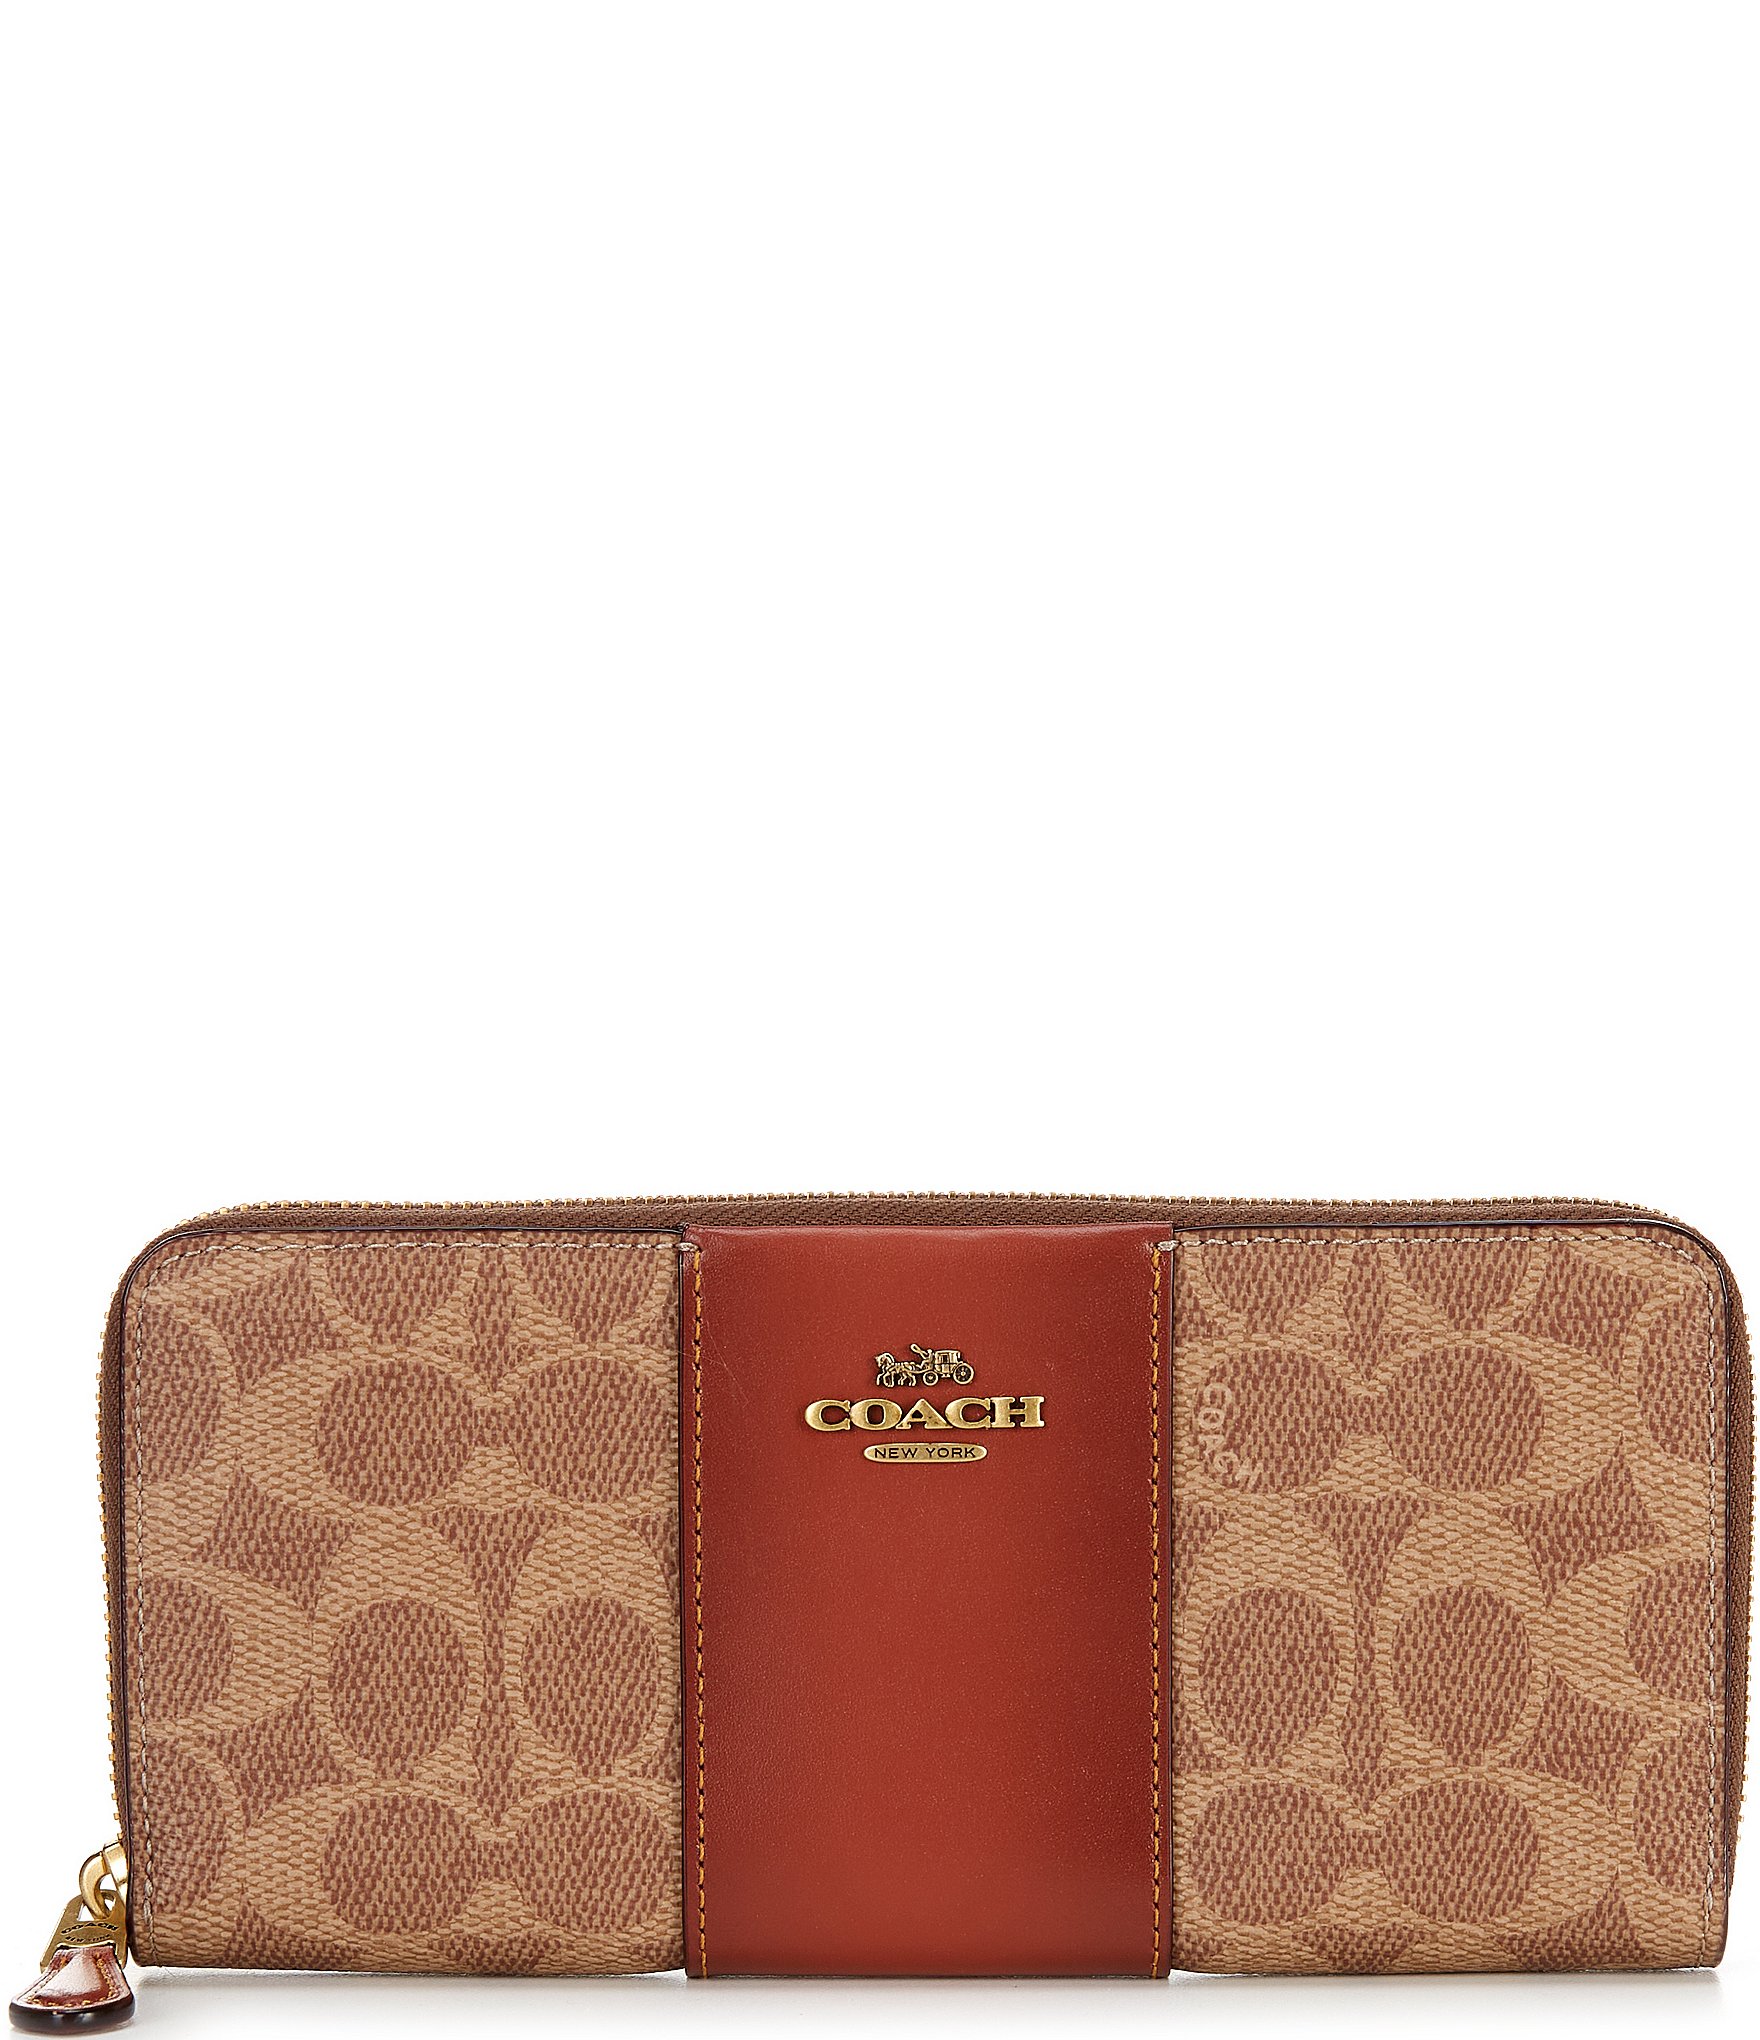 disney collection leather wallet Coach Brown in Leather - 28700537